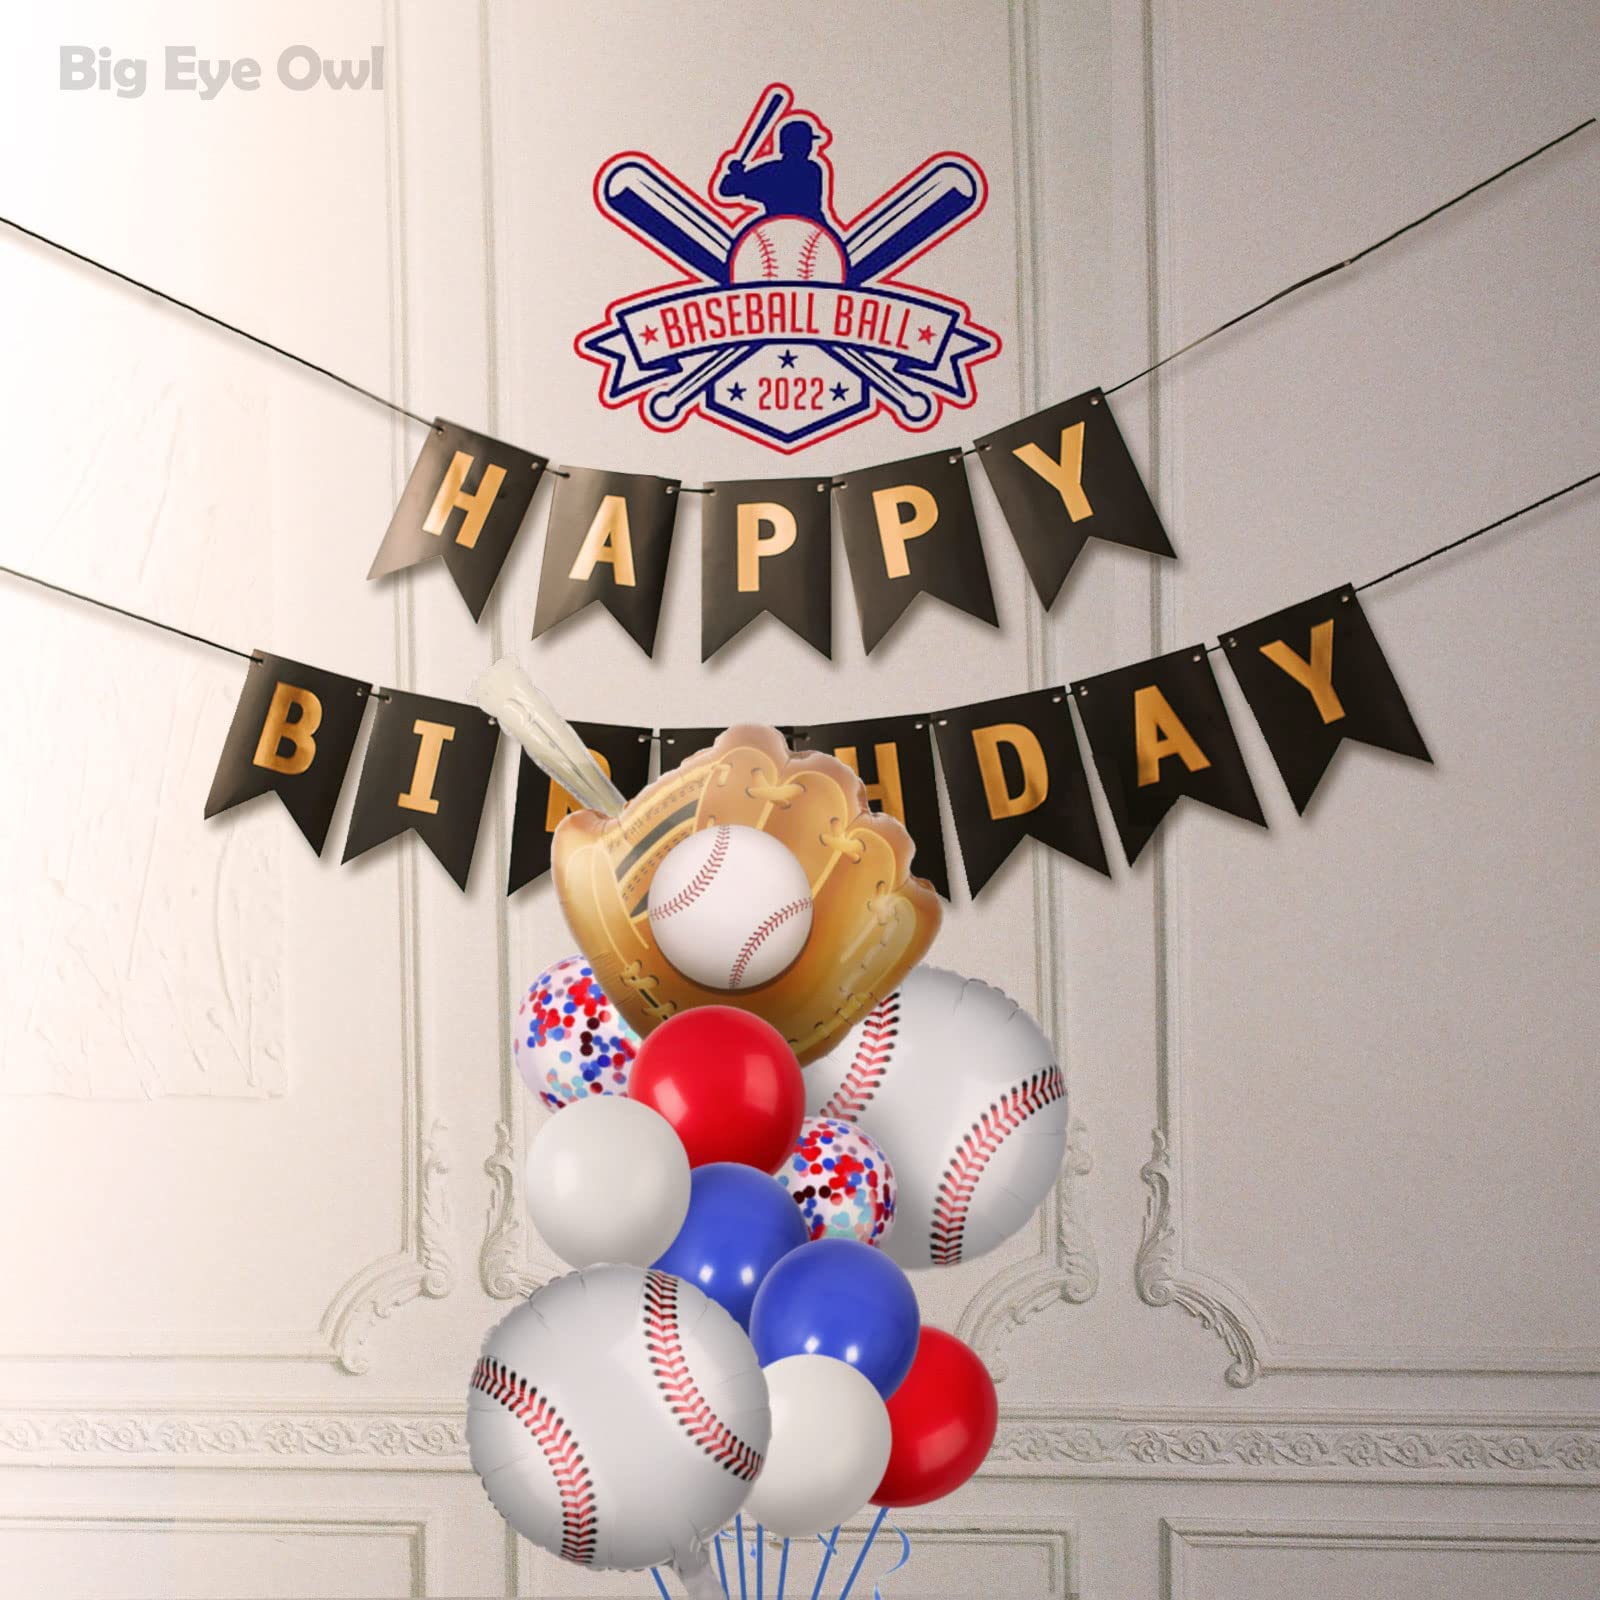 Baseball Balloons Birthday Party Supplies Decorations Glove Round Baseball Bat Theme Mylar Confetti Red and Blue white Foil Balloon Boy Baby Shower